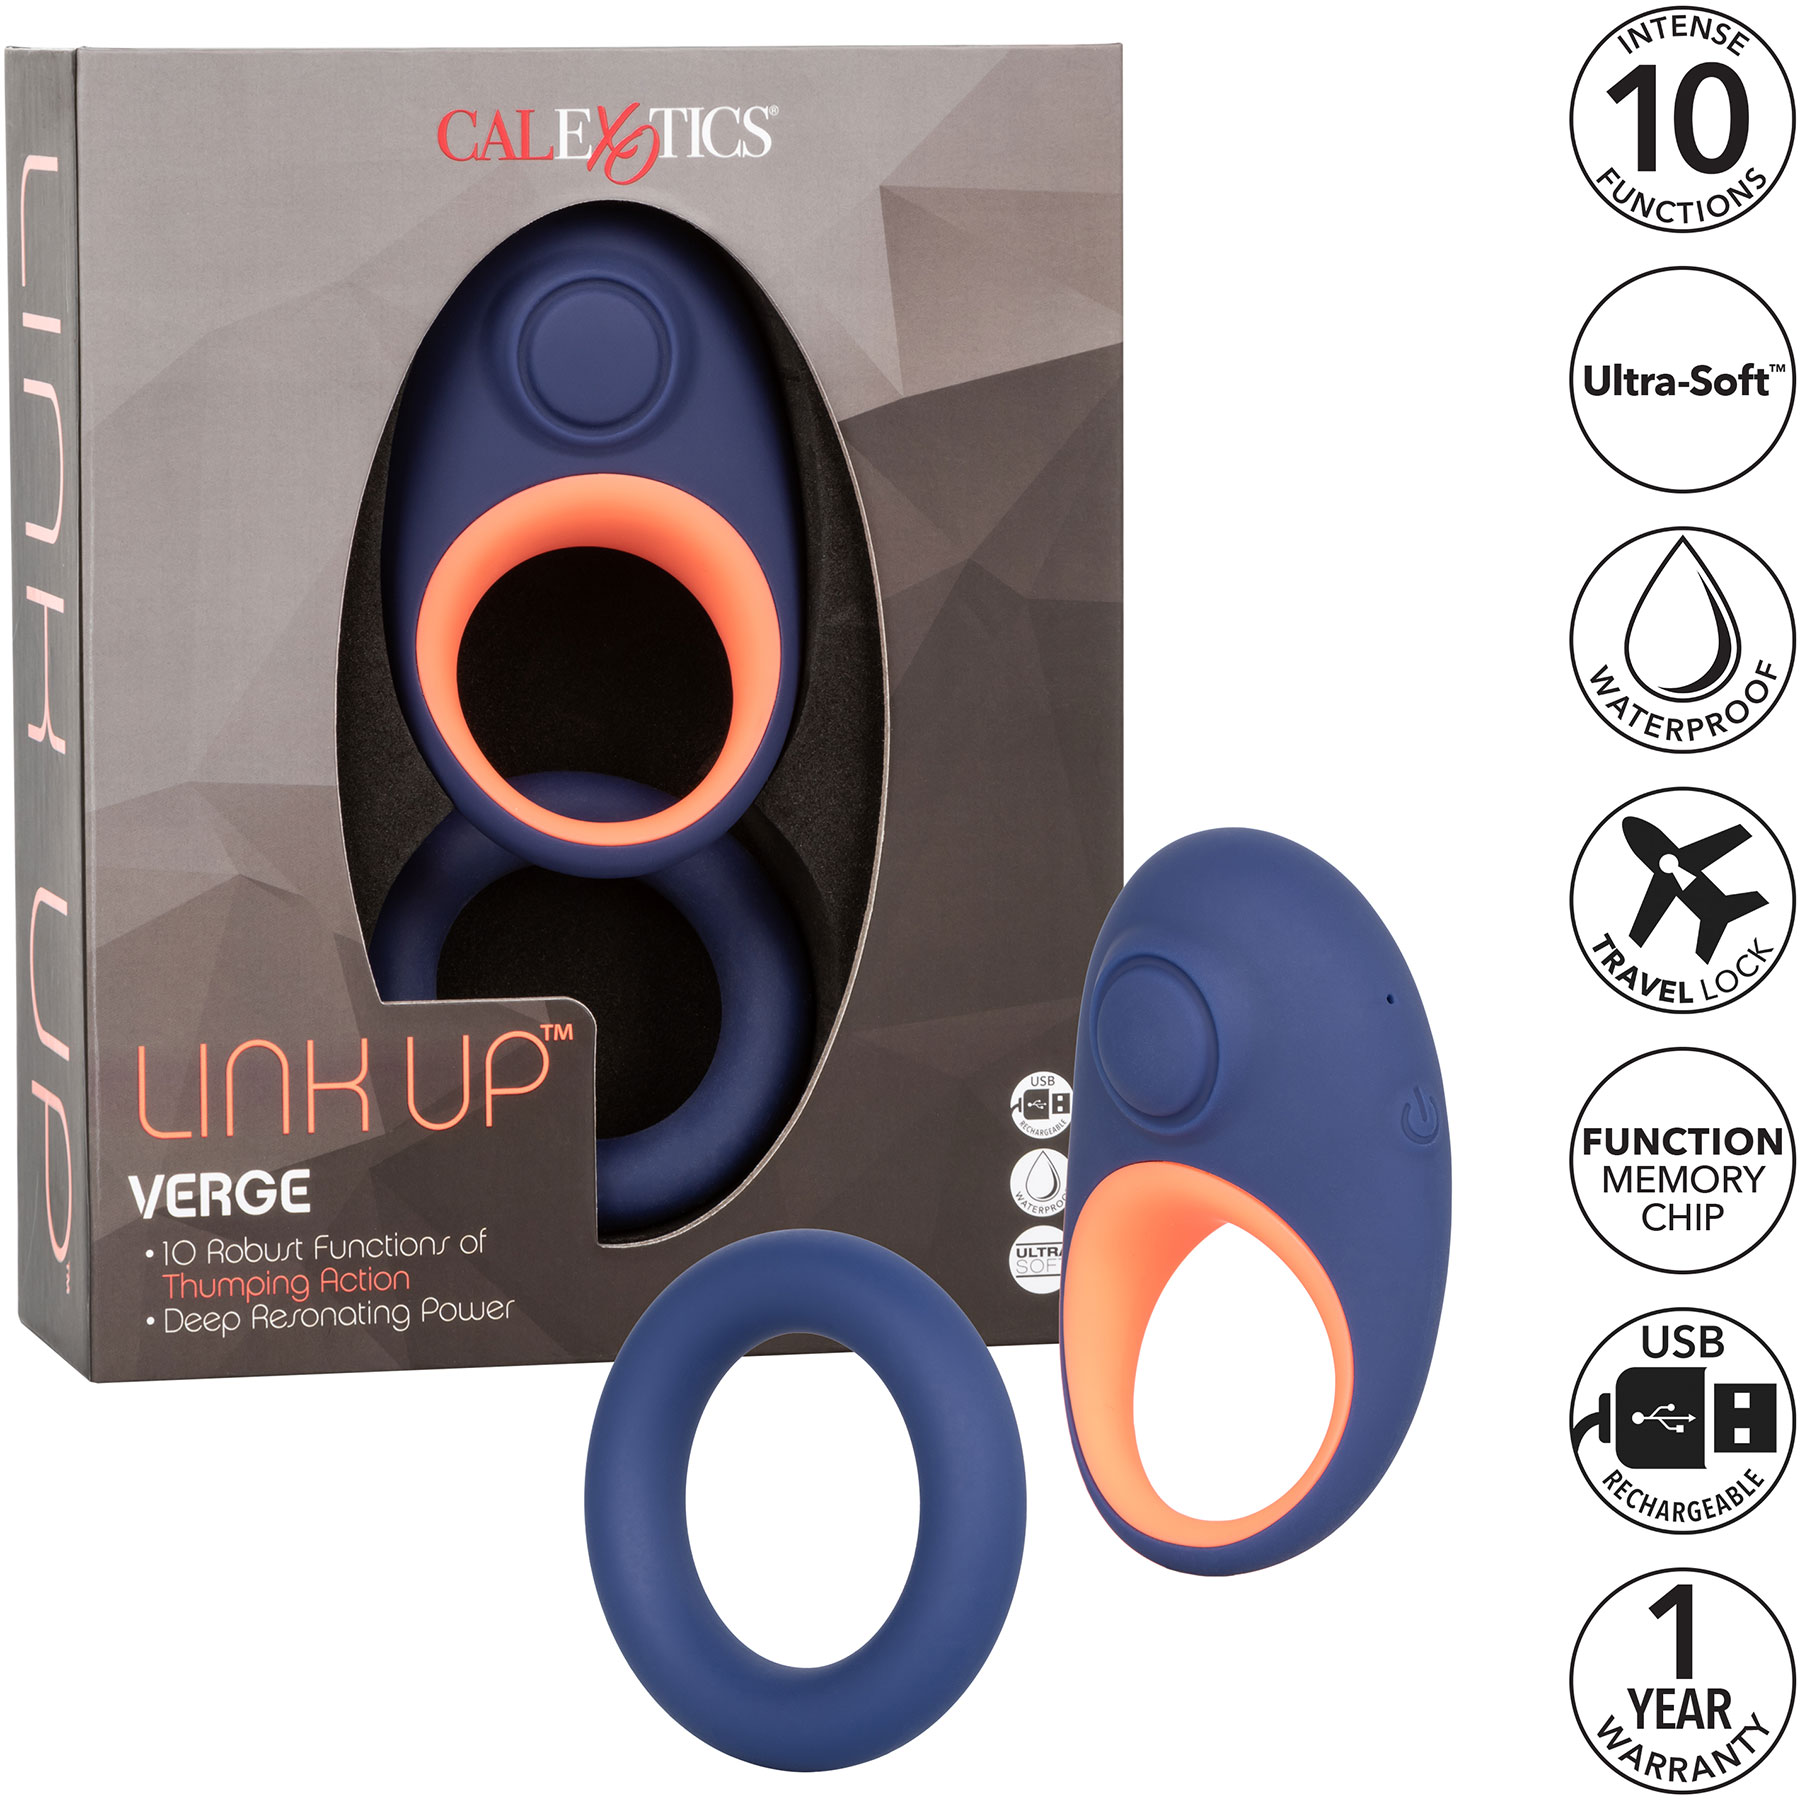 Link Up Verge Silicone Rechargeable Vibrating Cock Ring - Box & Features